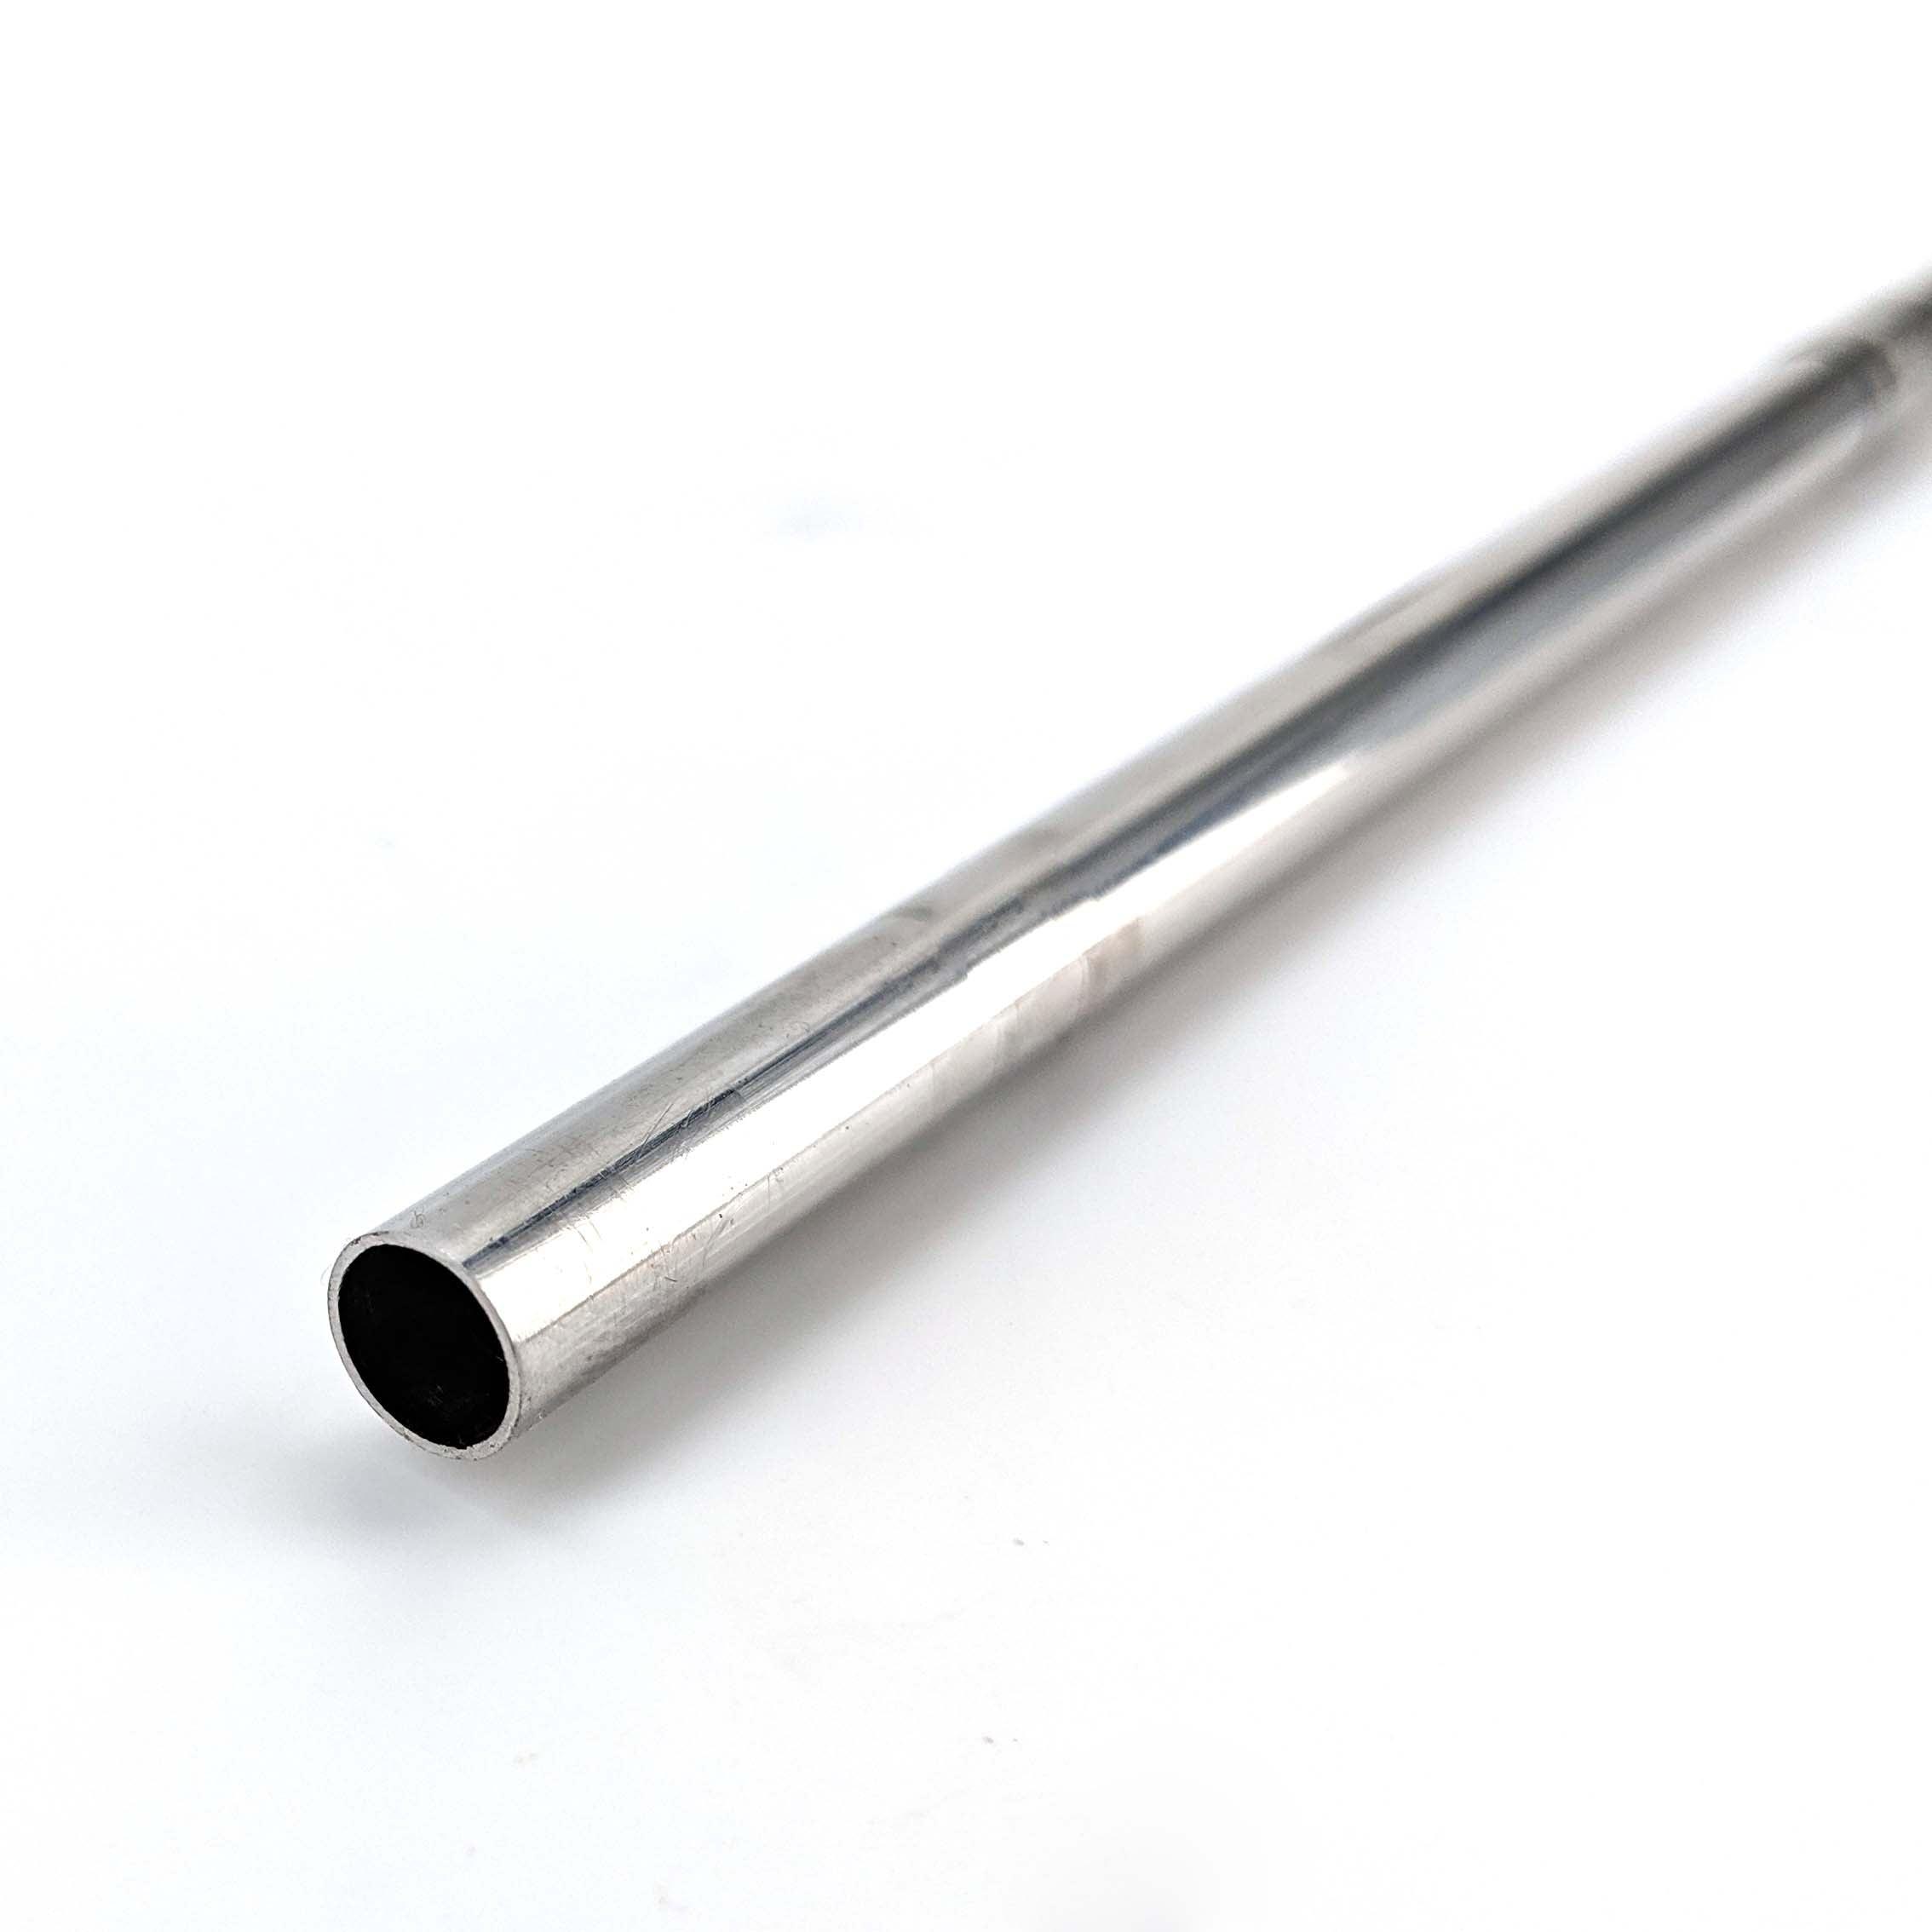 60cm Thermowell (8mm(5/16') OD) Includes duotight 8mm (5/16') x 1/4inch thread with o-ring and nut - KegLand